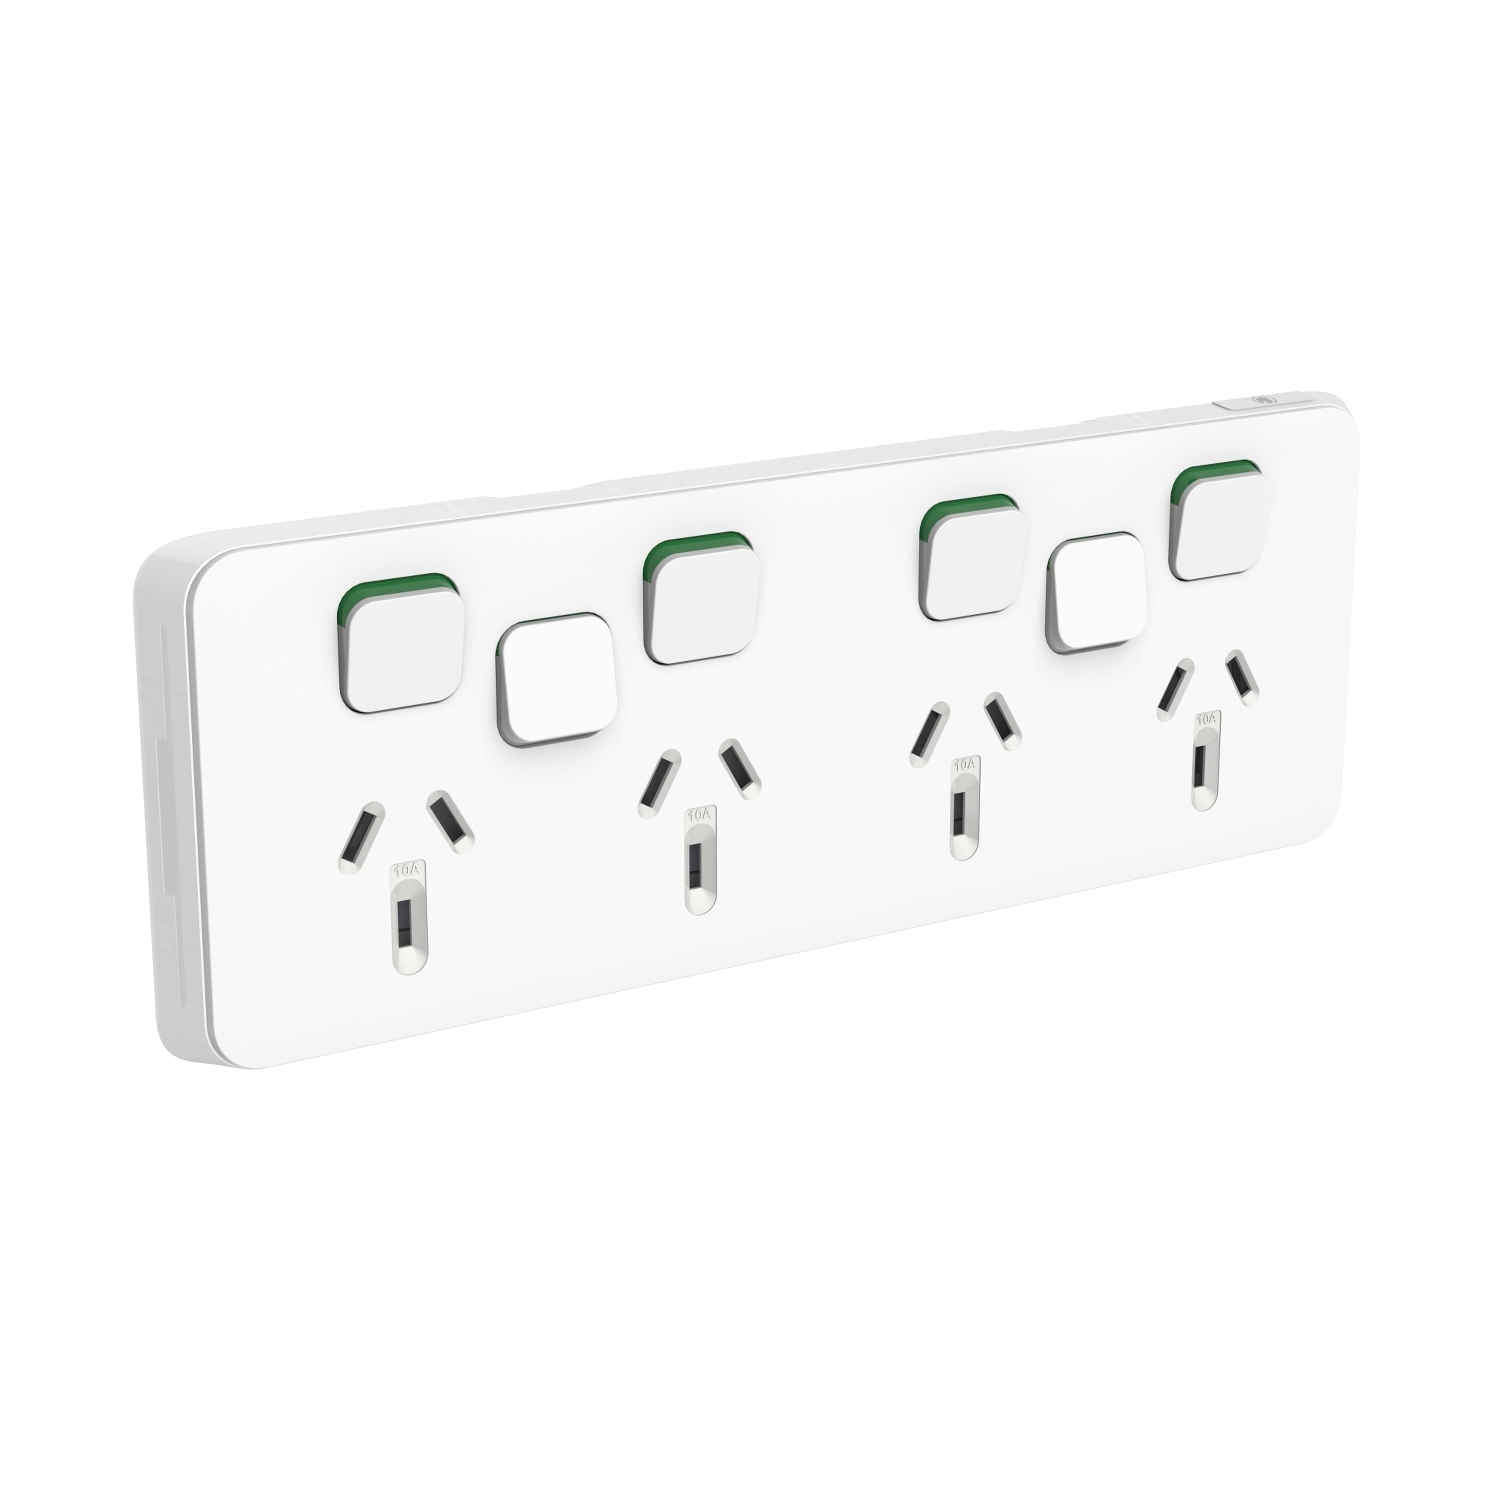 PDL Iconic, cover frame for switched GPO Horiz 10A 250V option for 2 extra switch - Vivid White